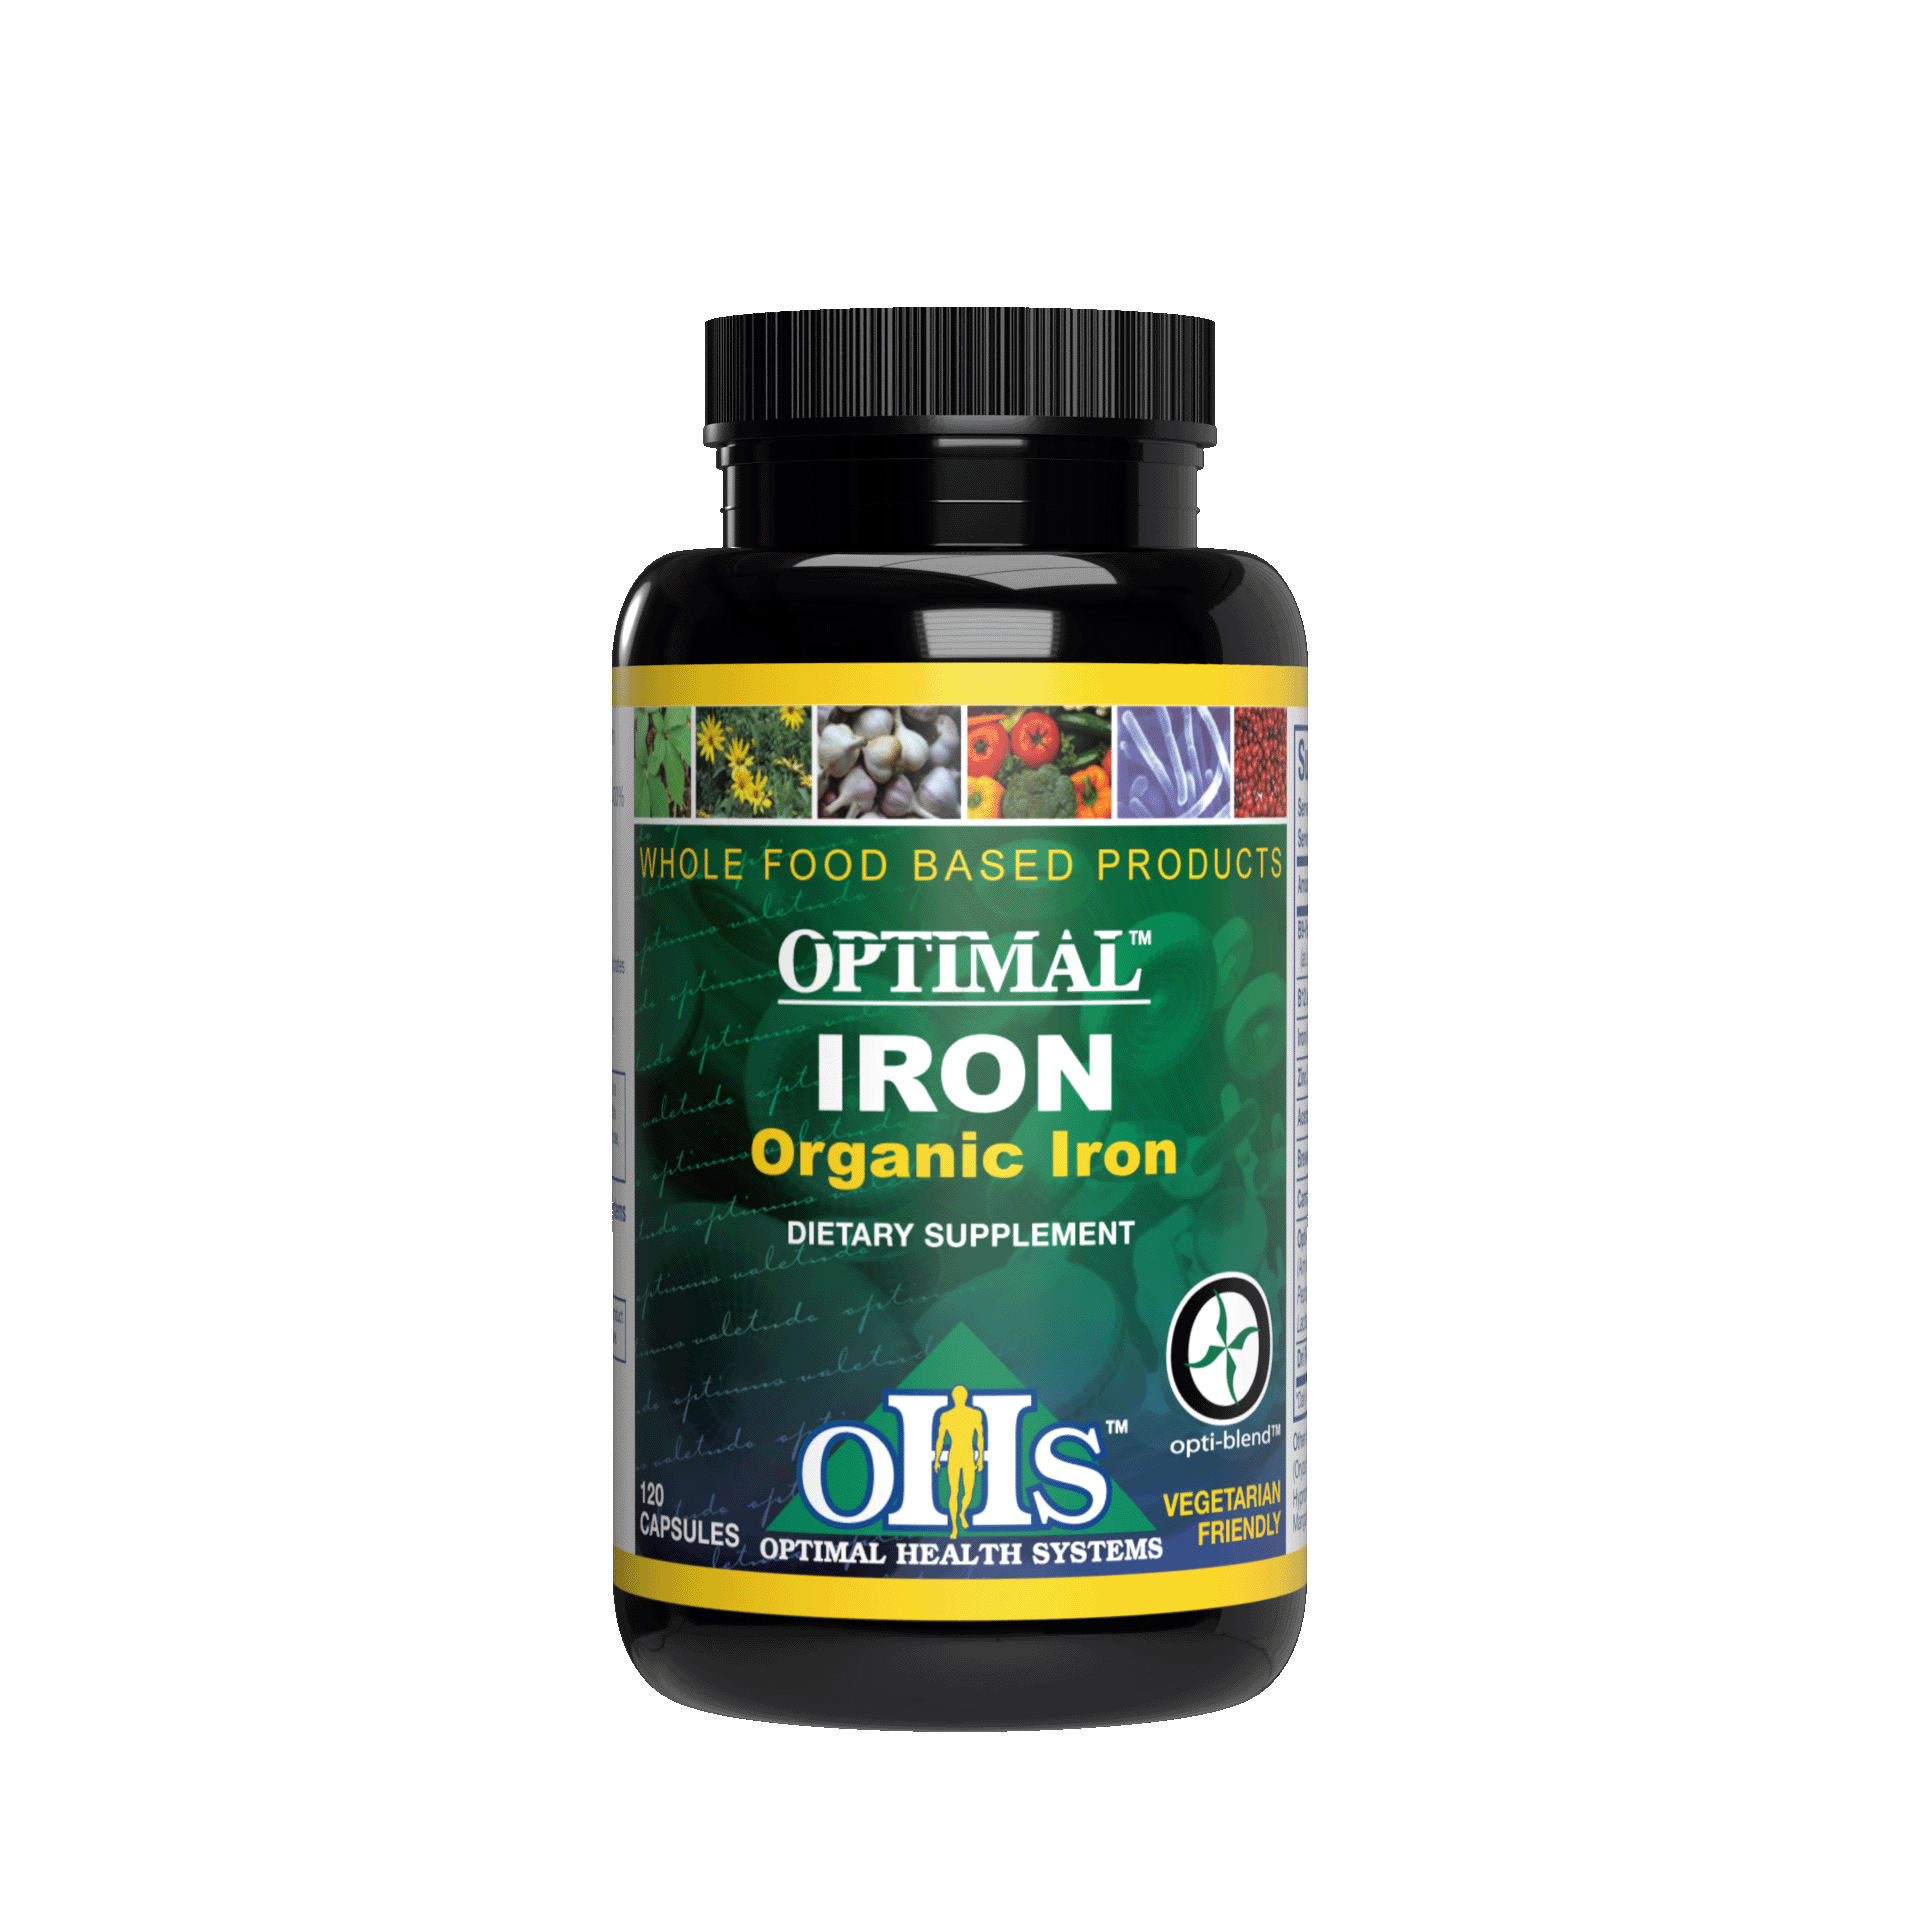 Image of a bottle of Optimal Iron.